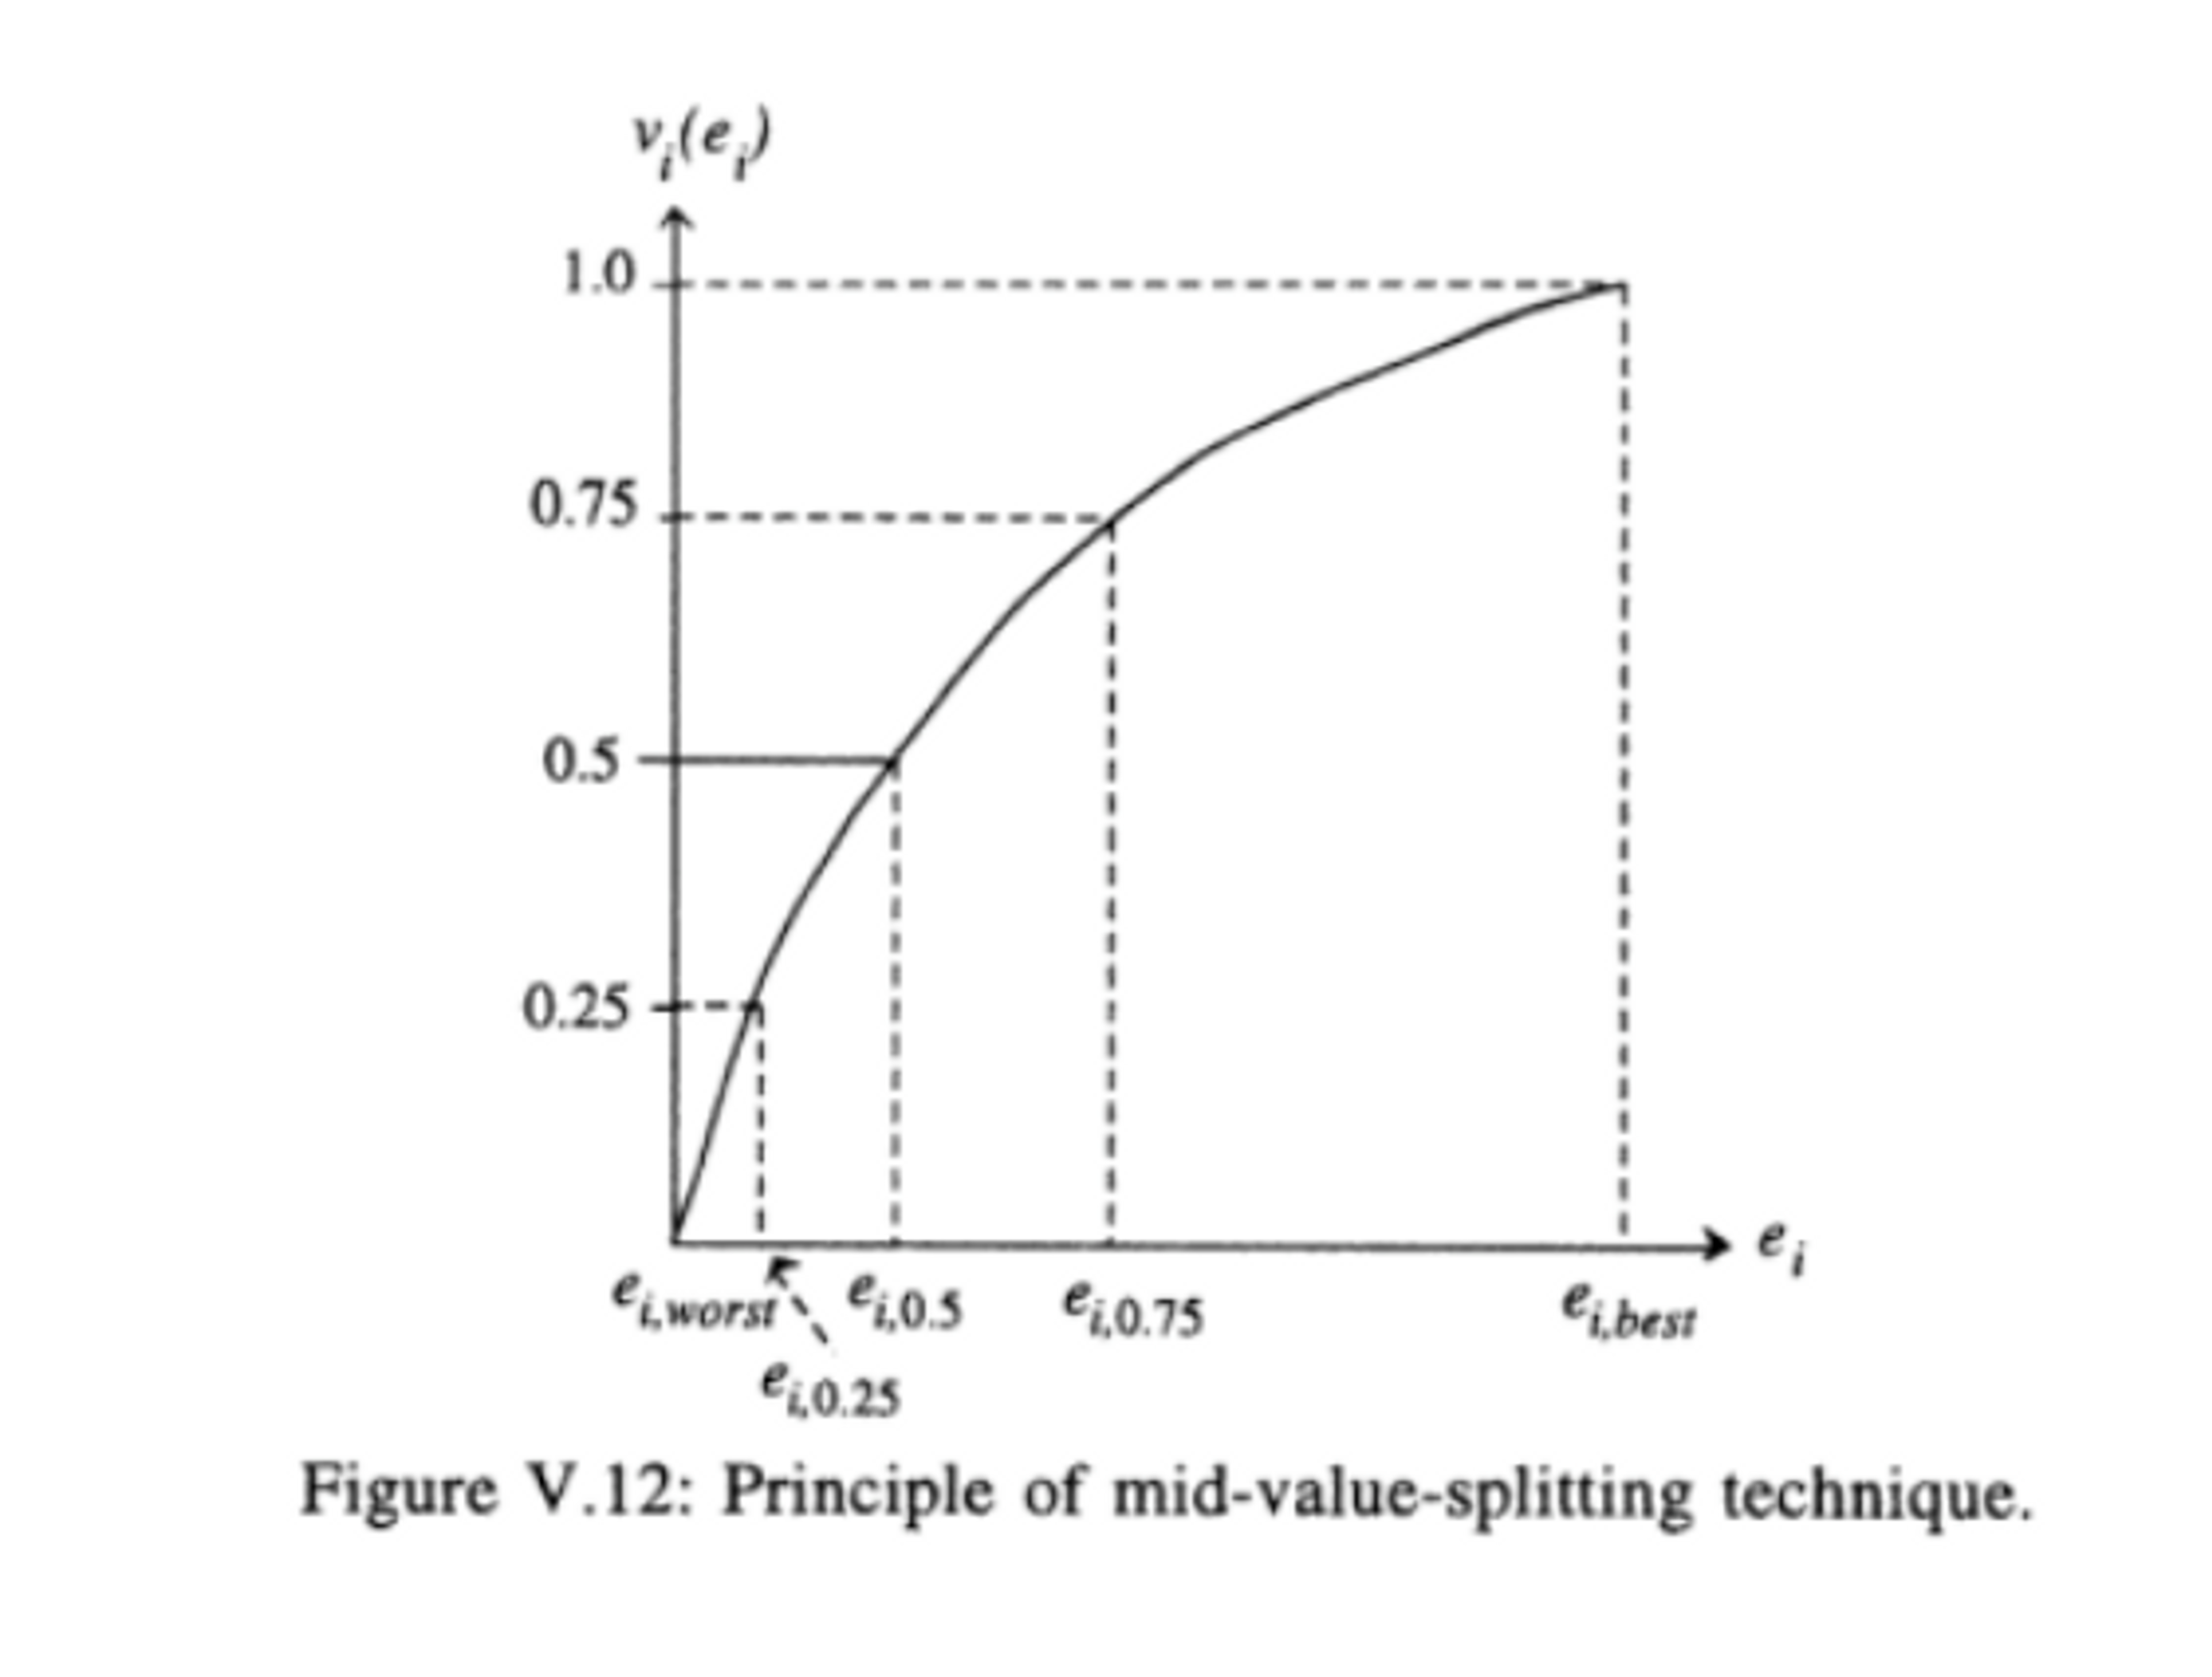 An image that shows the Principle of mid-value-splitting technique